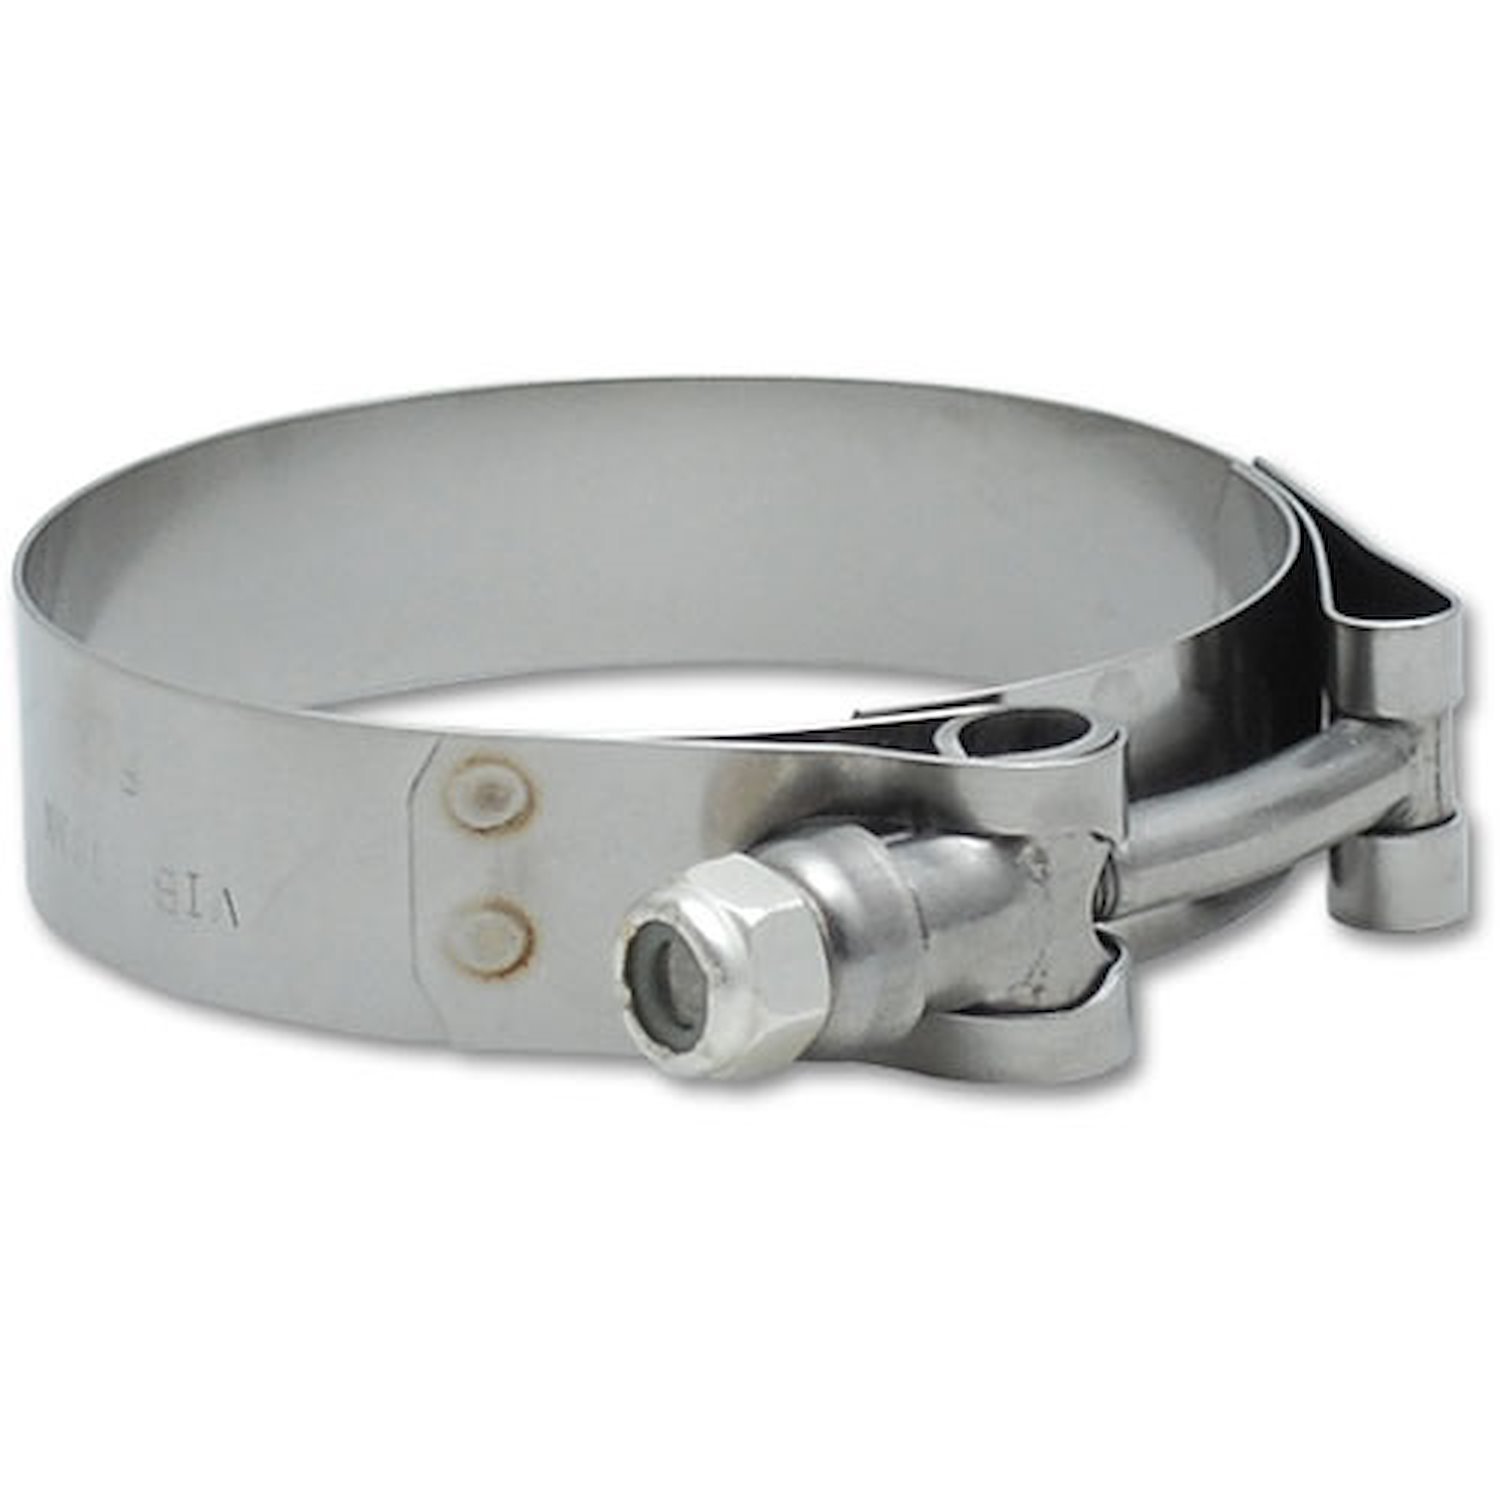 Stainless Steel T-Bolt Clamps Clamp Range 4.75" - 5.10"